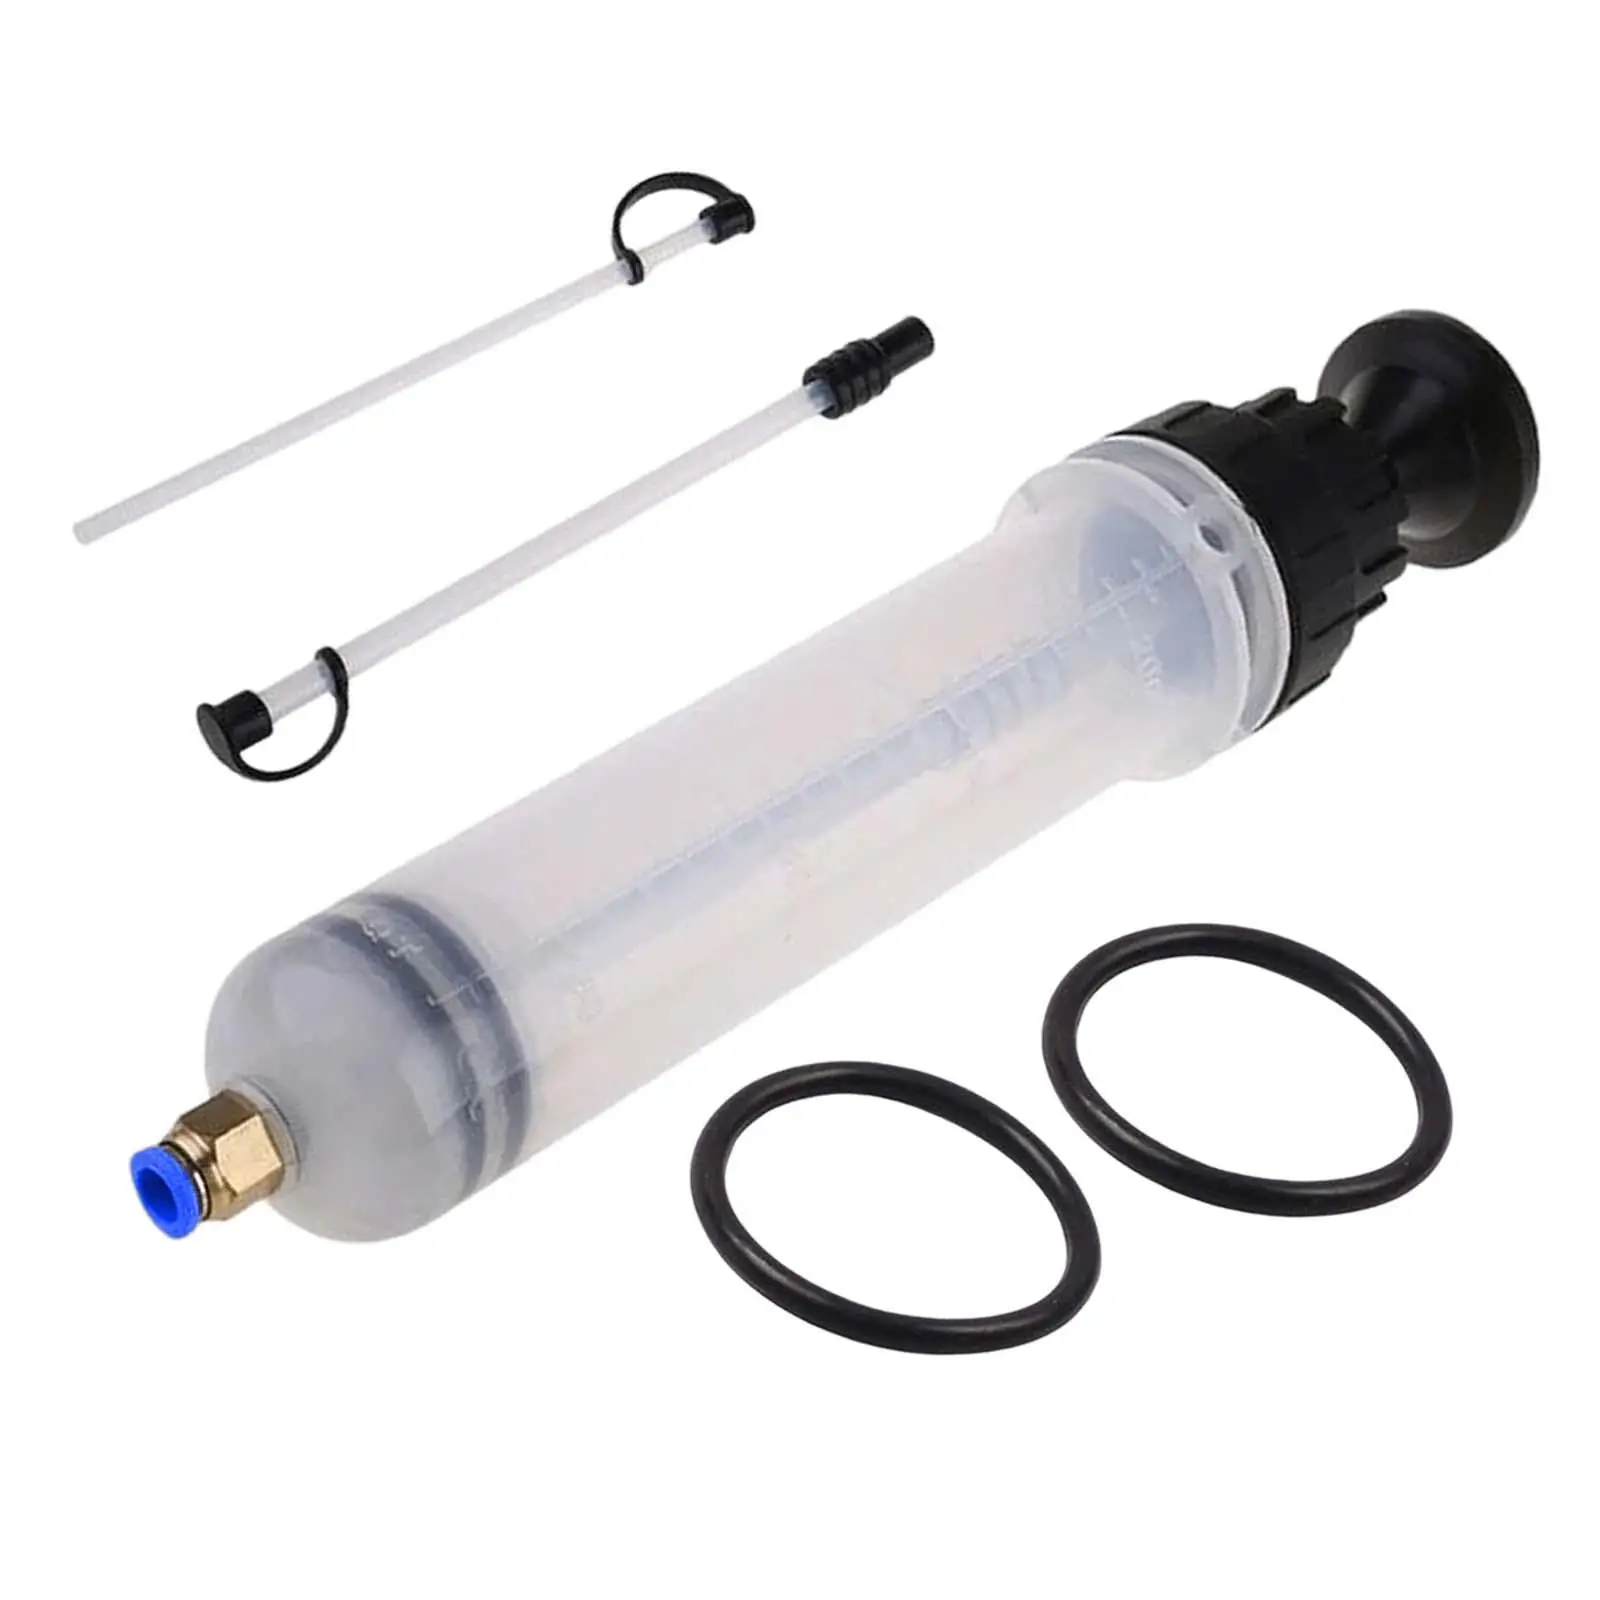 Brake Fluid Extractor Fluid Transfer Hand Pump Replacement Tool for Car